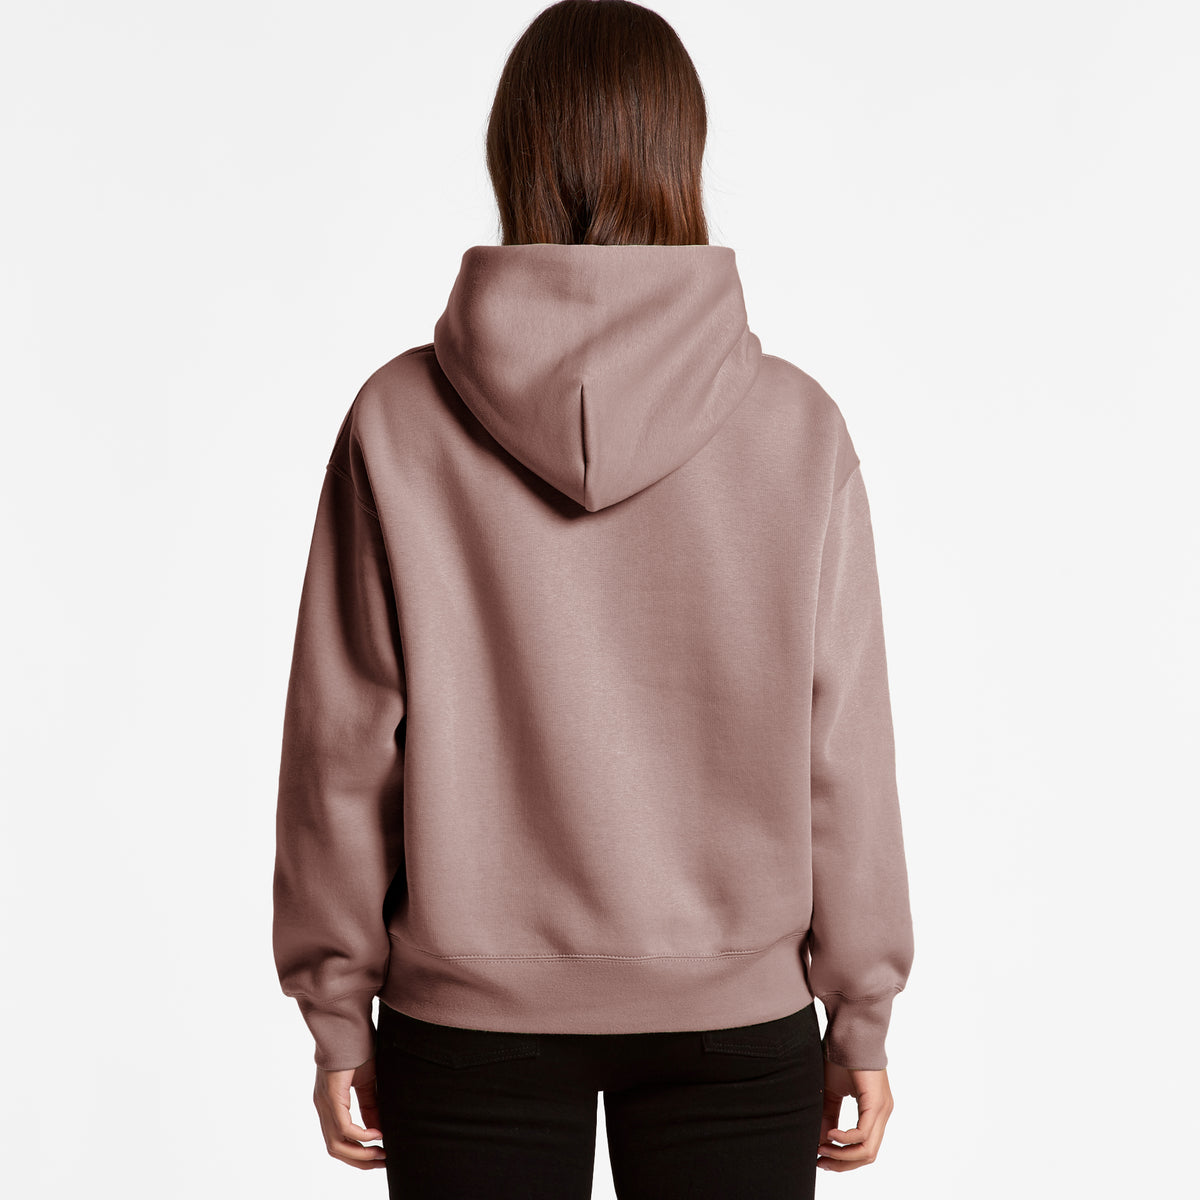 Choose Green, Live Clean - Women&#39;s Heavyweight Relaxed Hoodie